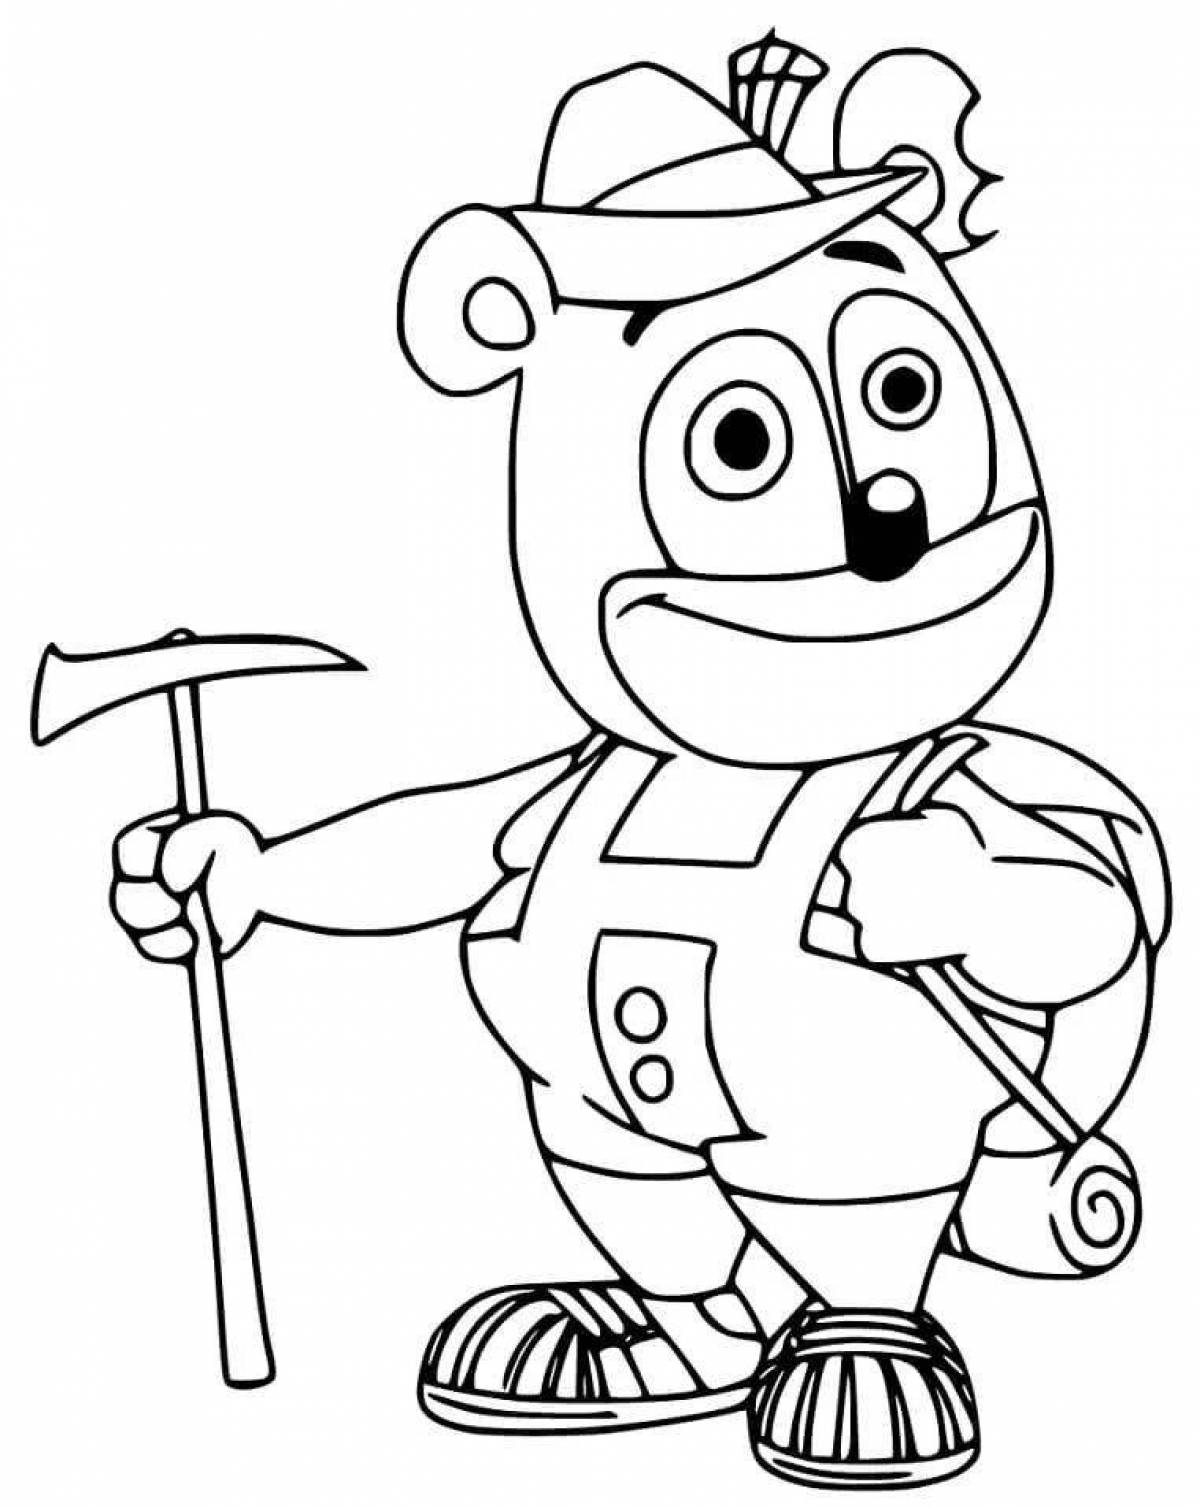 Happy humber coloring page